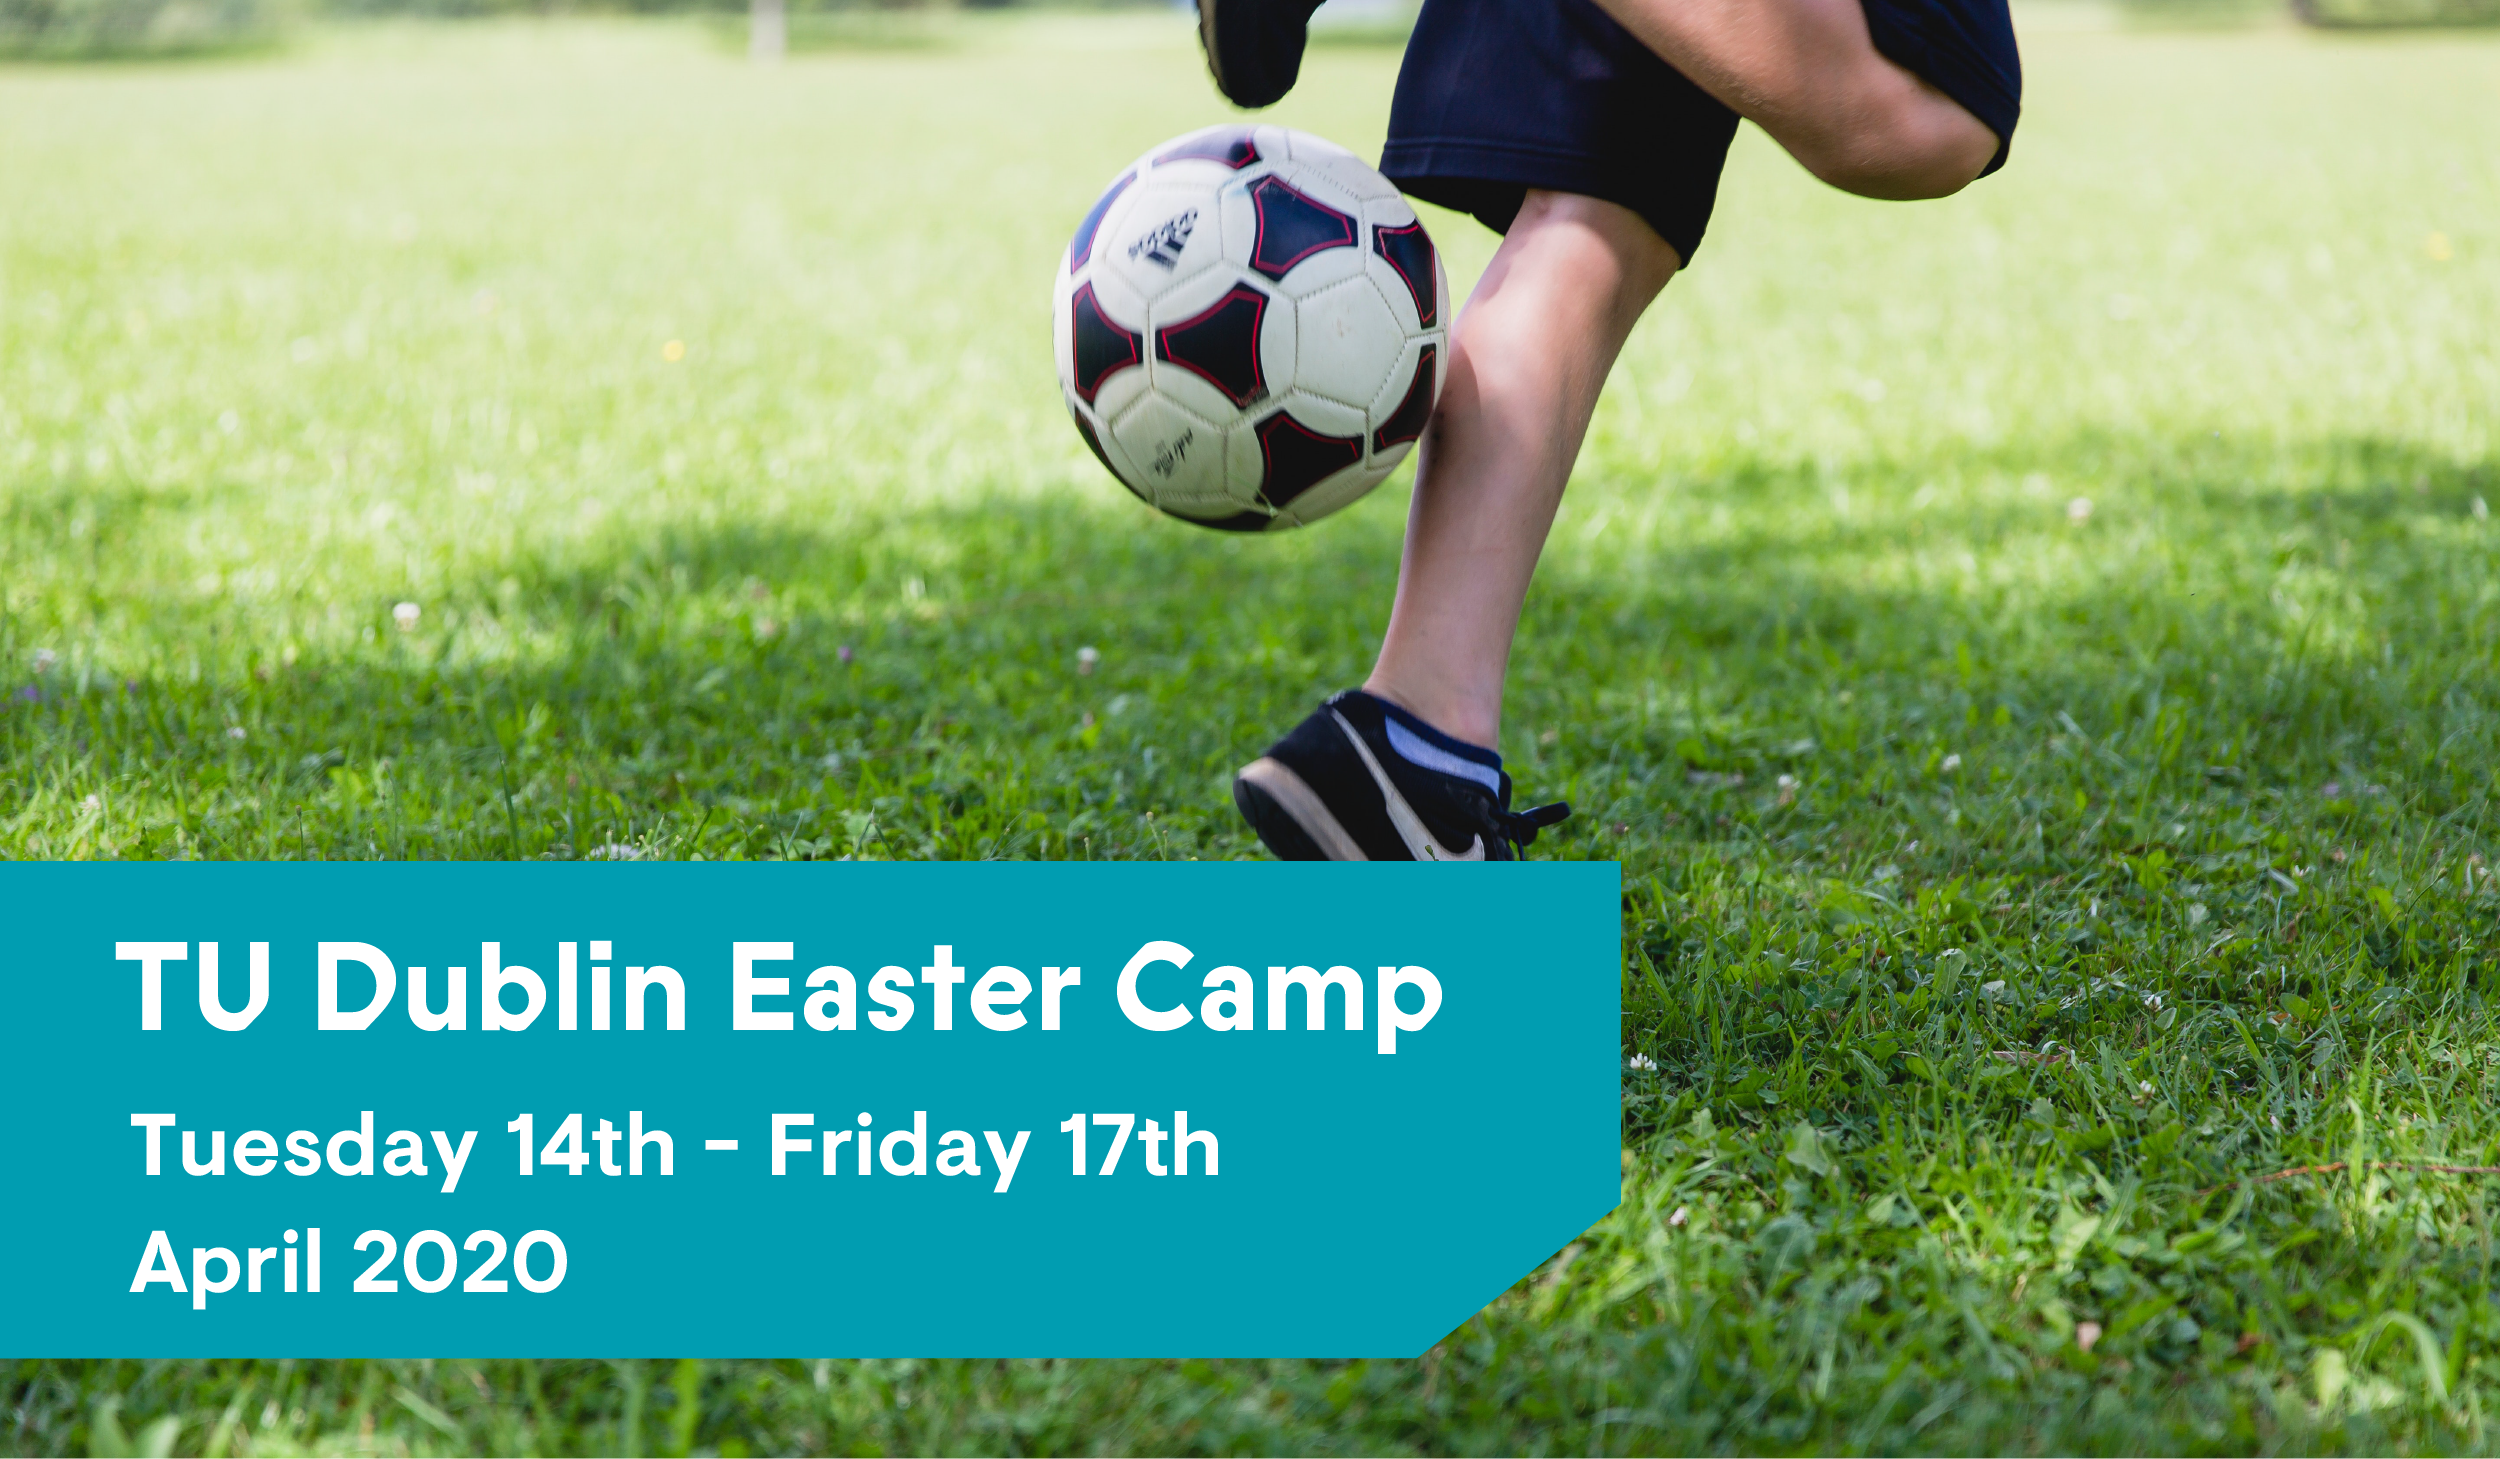 TU Dublin Easter Camp 2020 text and image of a boy playing football